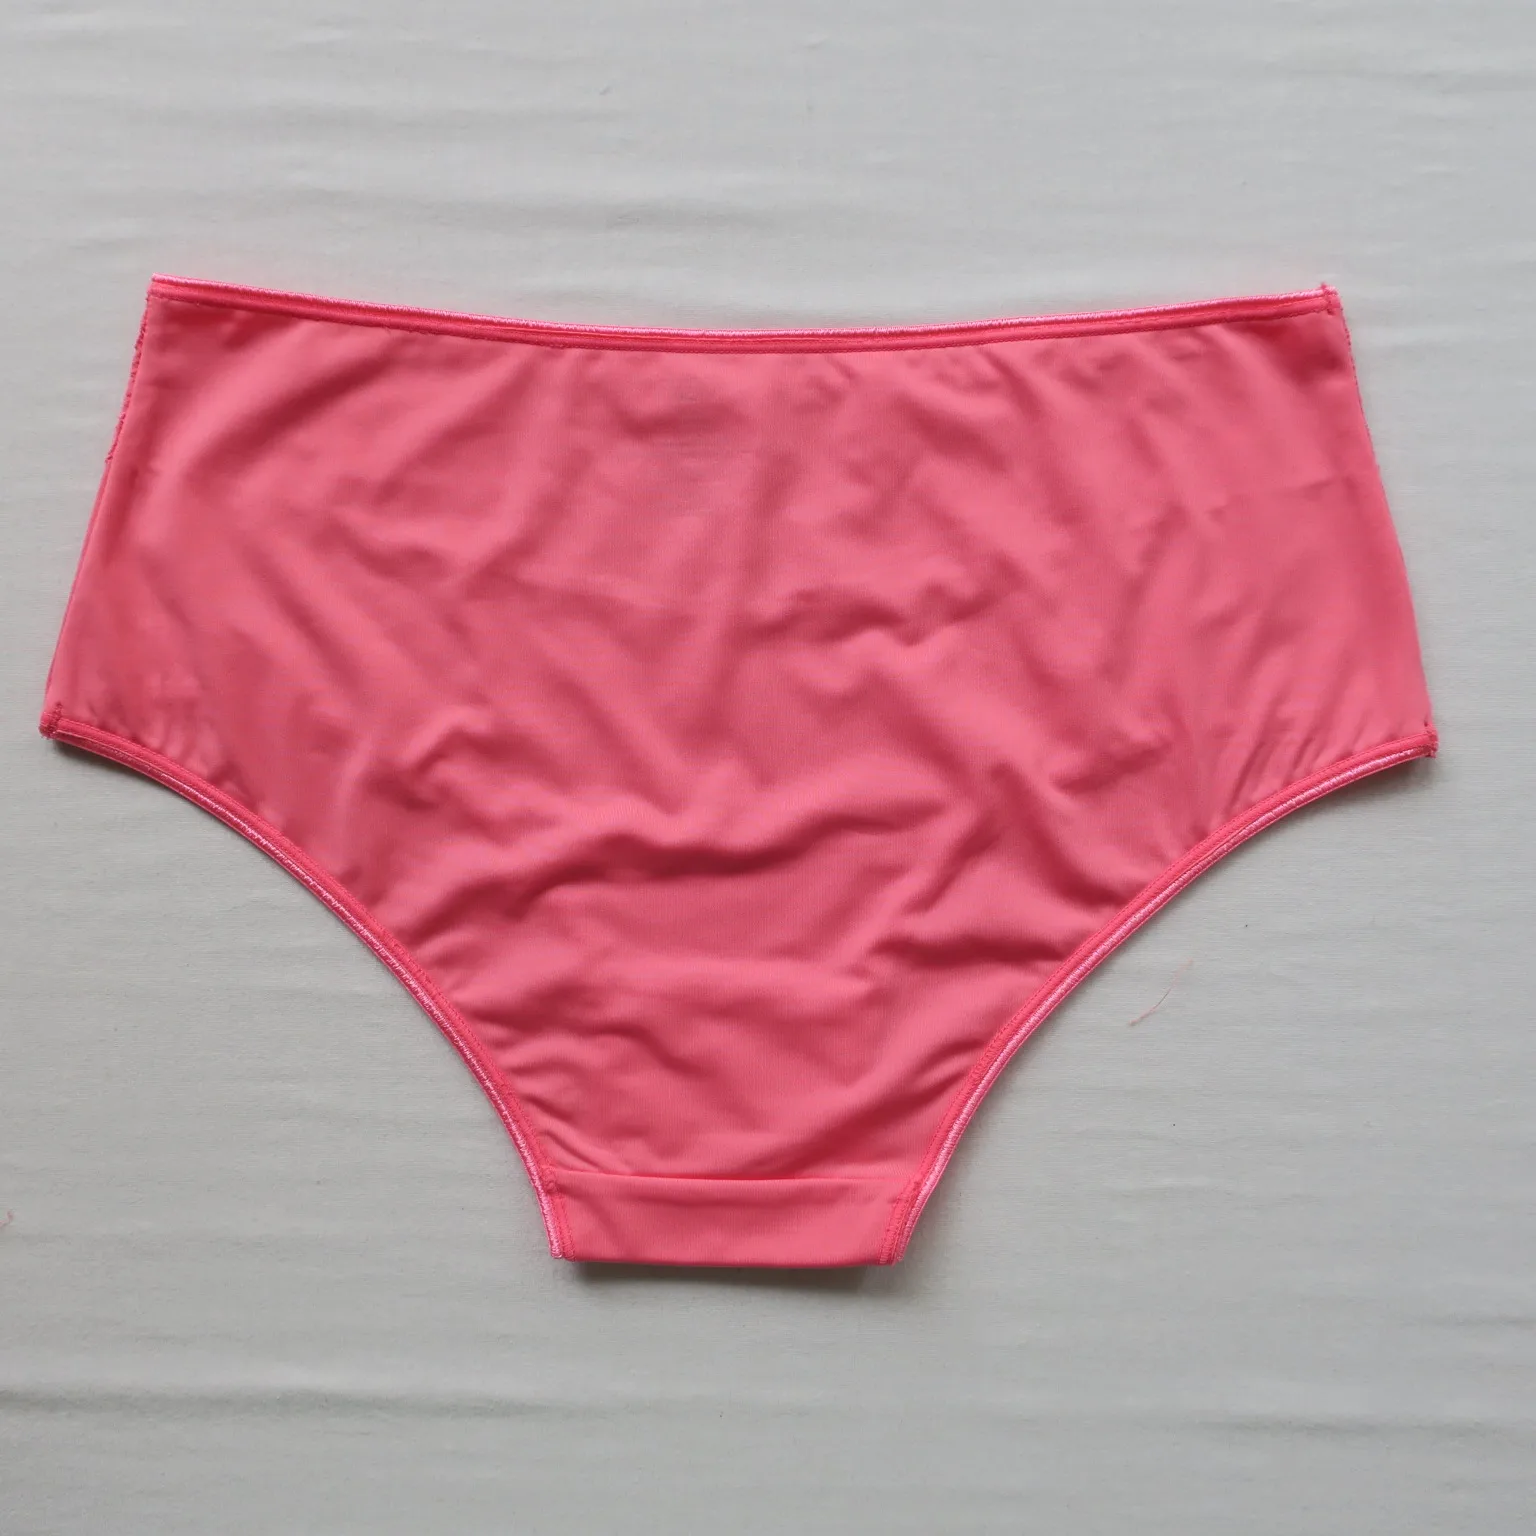 Oem China Ladies Daily Underpants Comfortable Brief With Lace Woman's ...